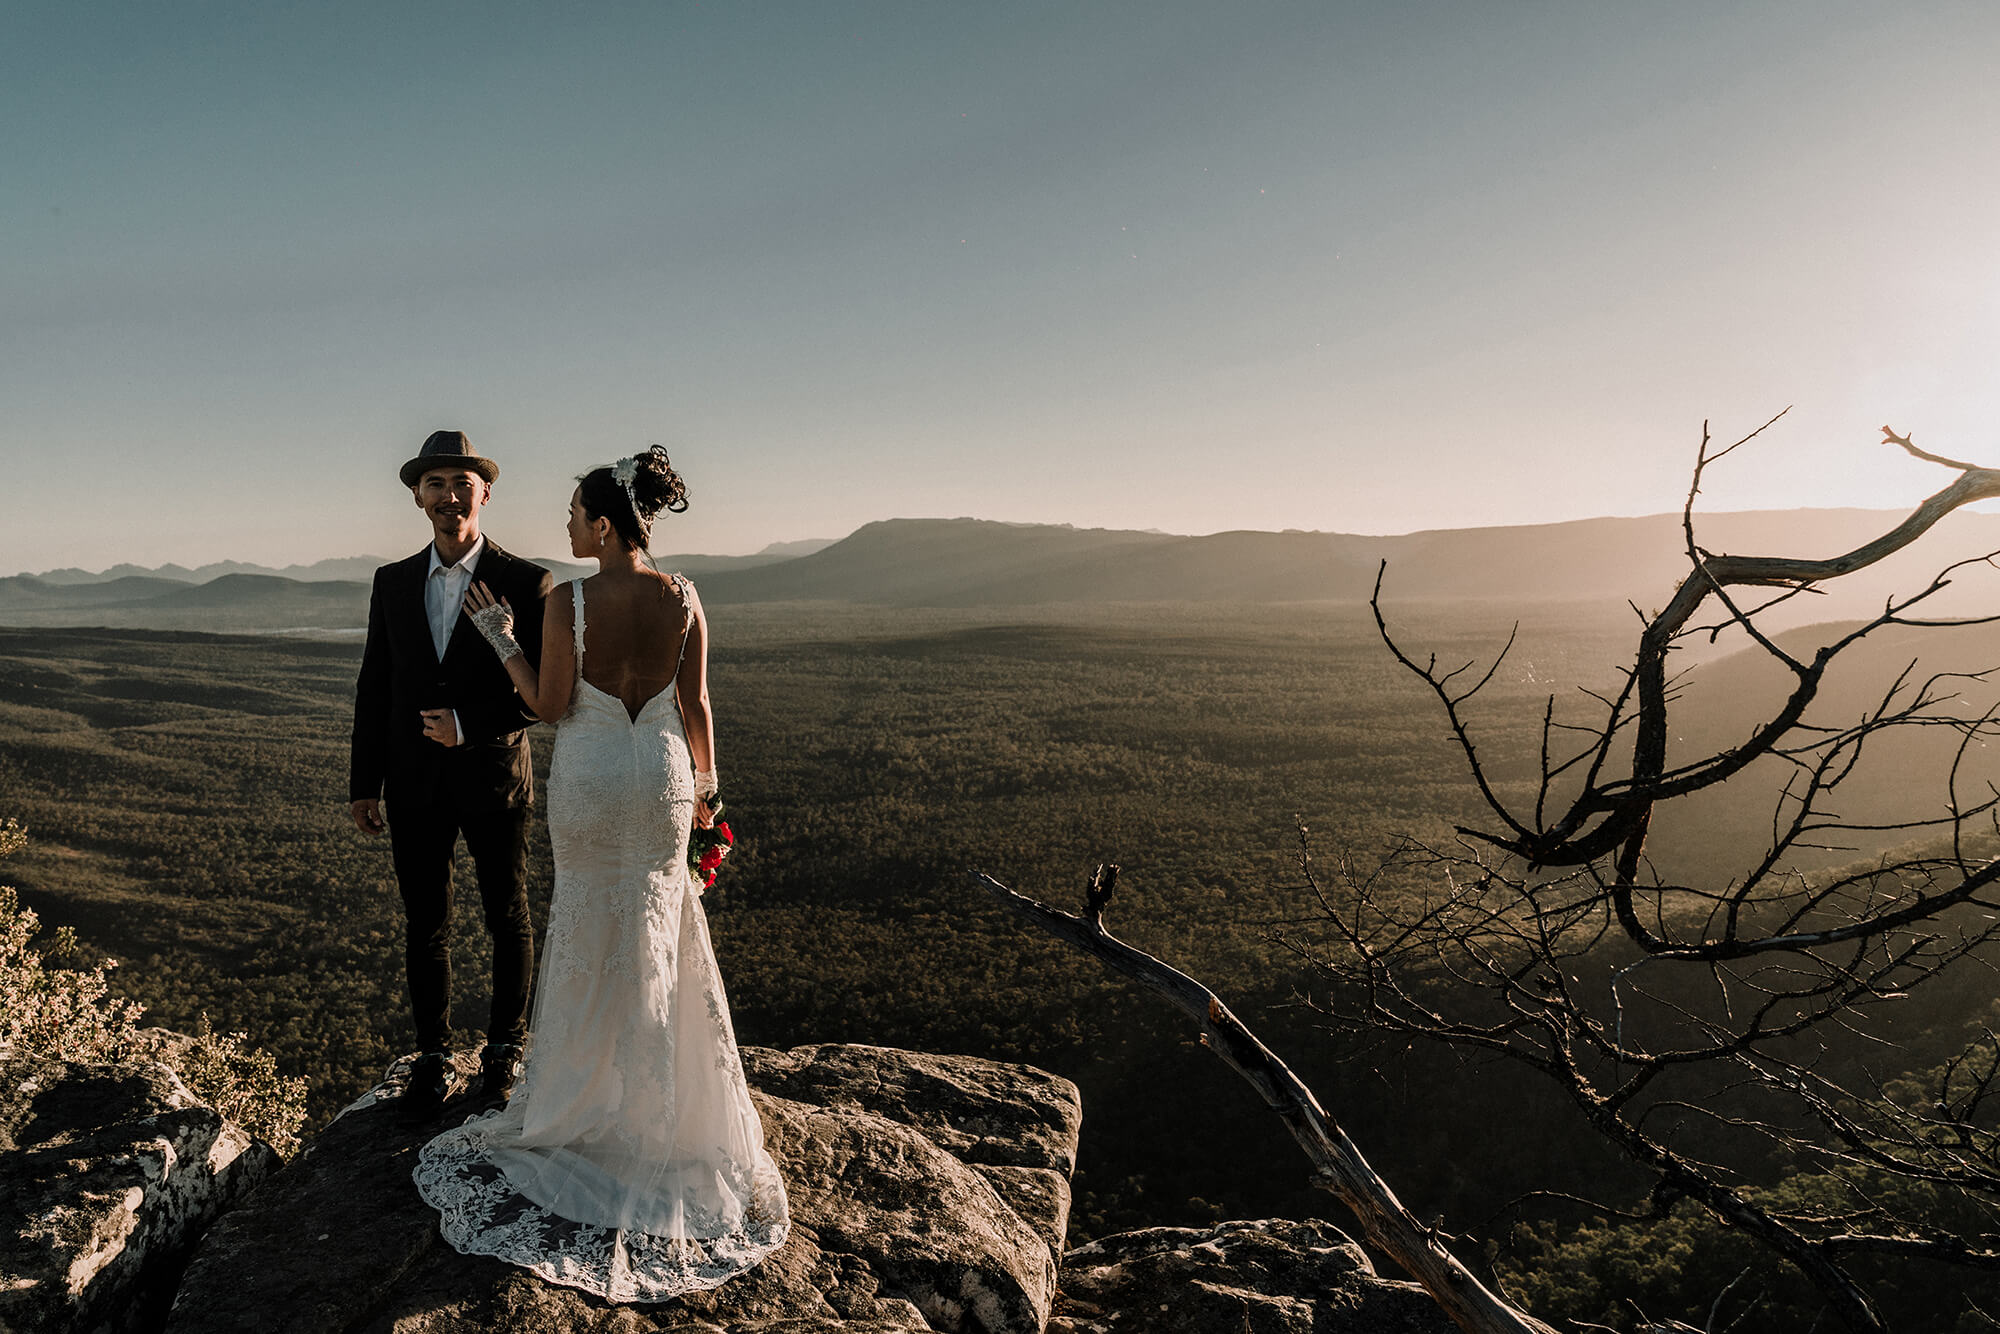 Engagement Photo Ideas, bride and groom poses this beautiful view of the mountain by the cliff by Black Avenue Productions